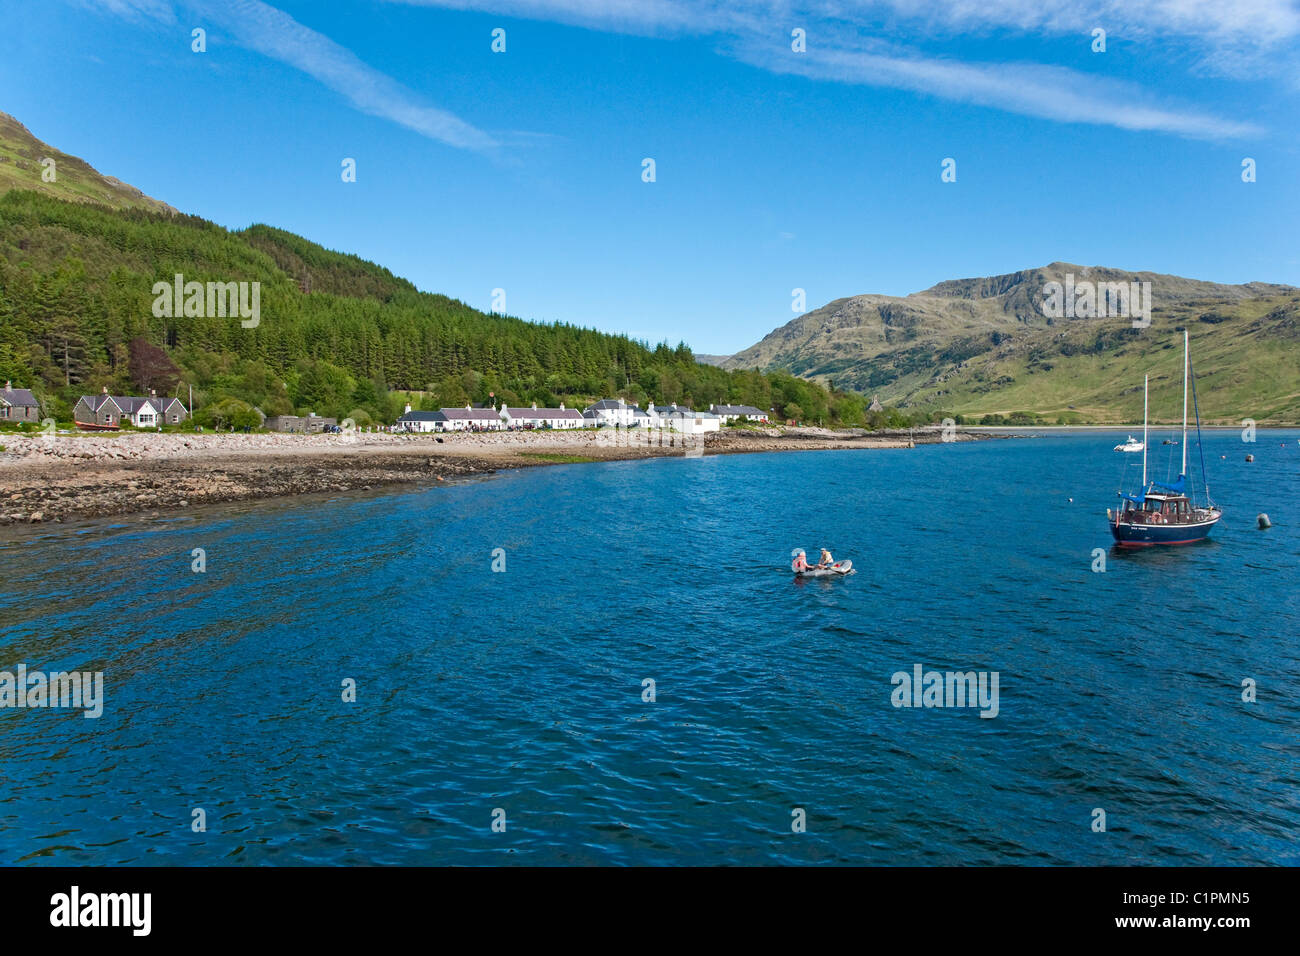 The small settlement of Inverie in Knoydart Highland of Scotland seen from Loch Nevis with sailors approaching their boat Stock Photo